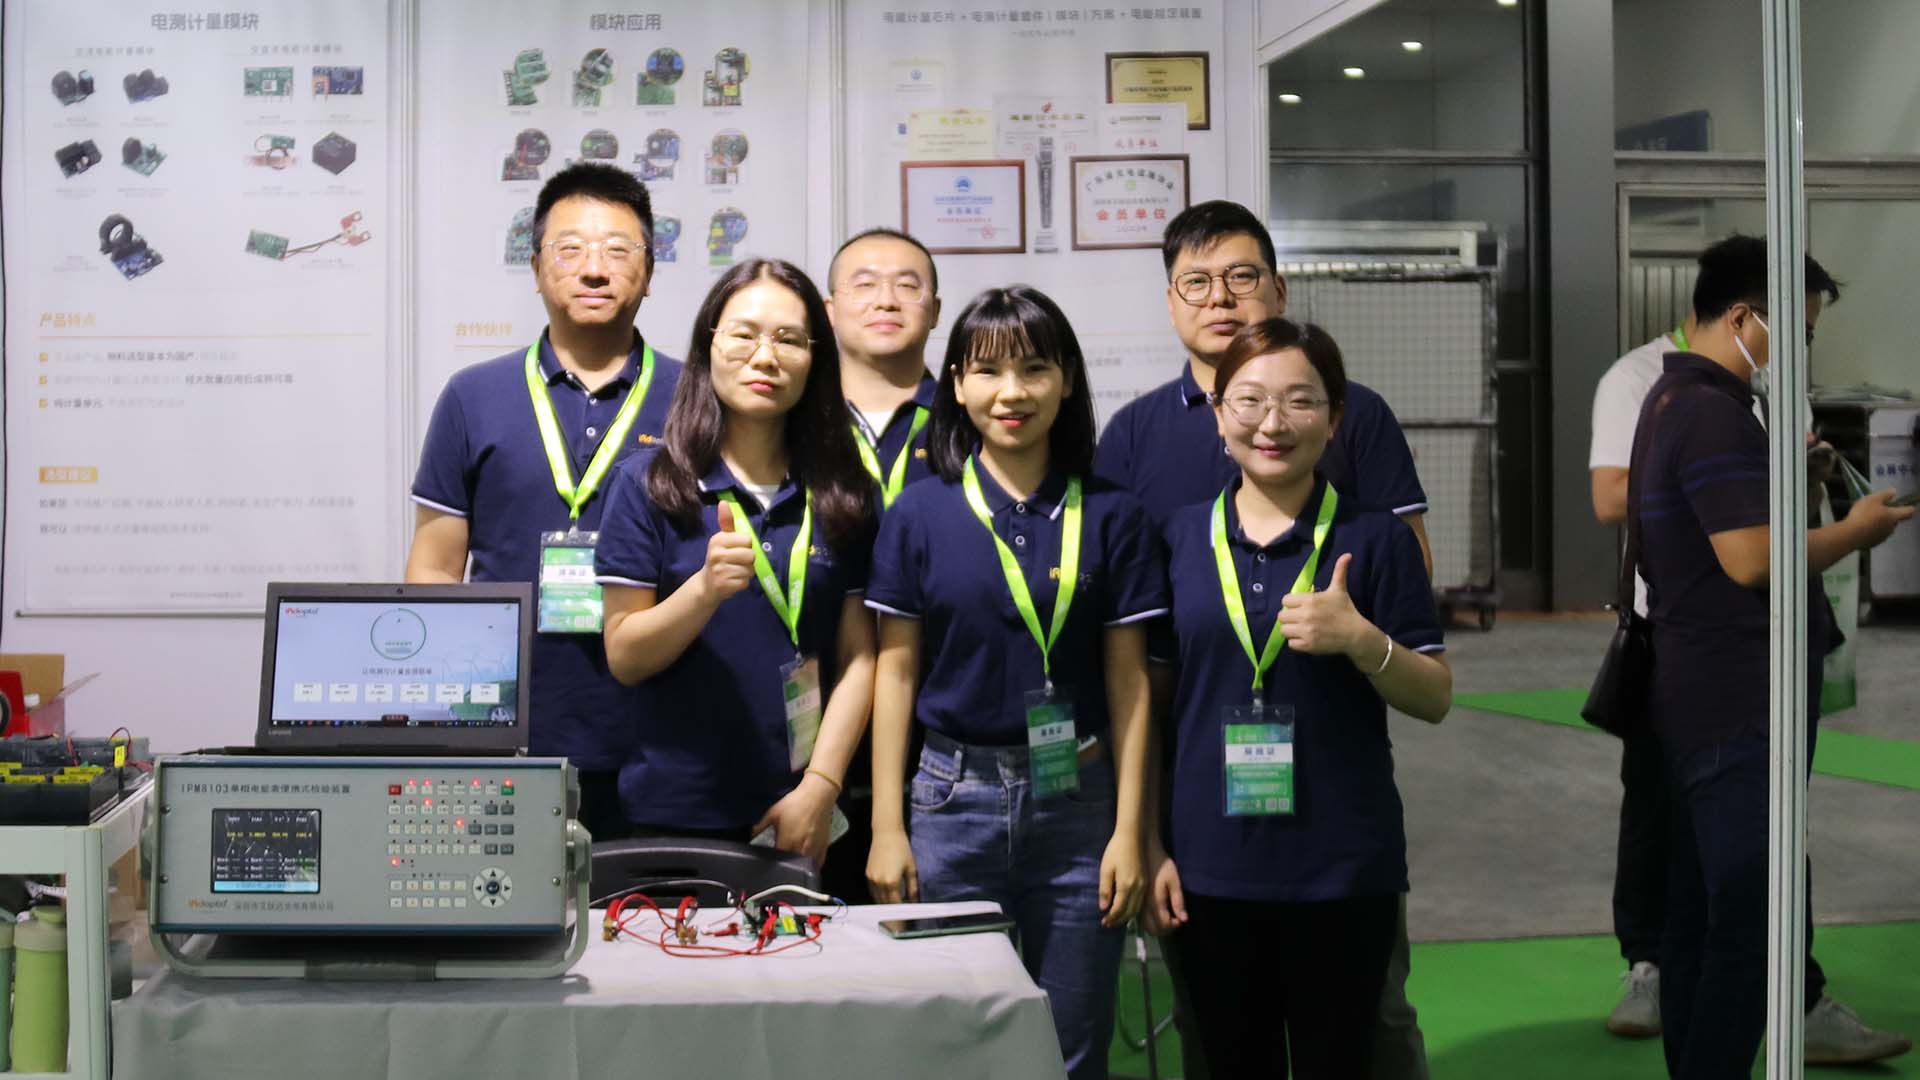 Exhibition Review | Shenzhen International Charging Pile Expo Successfully Concludes – Thank You for Your Attention and Participation!